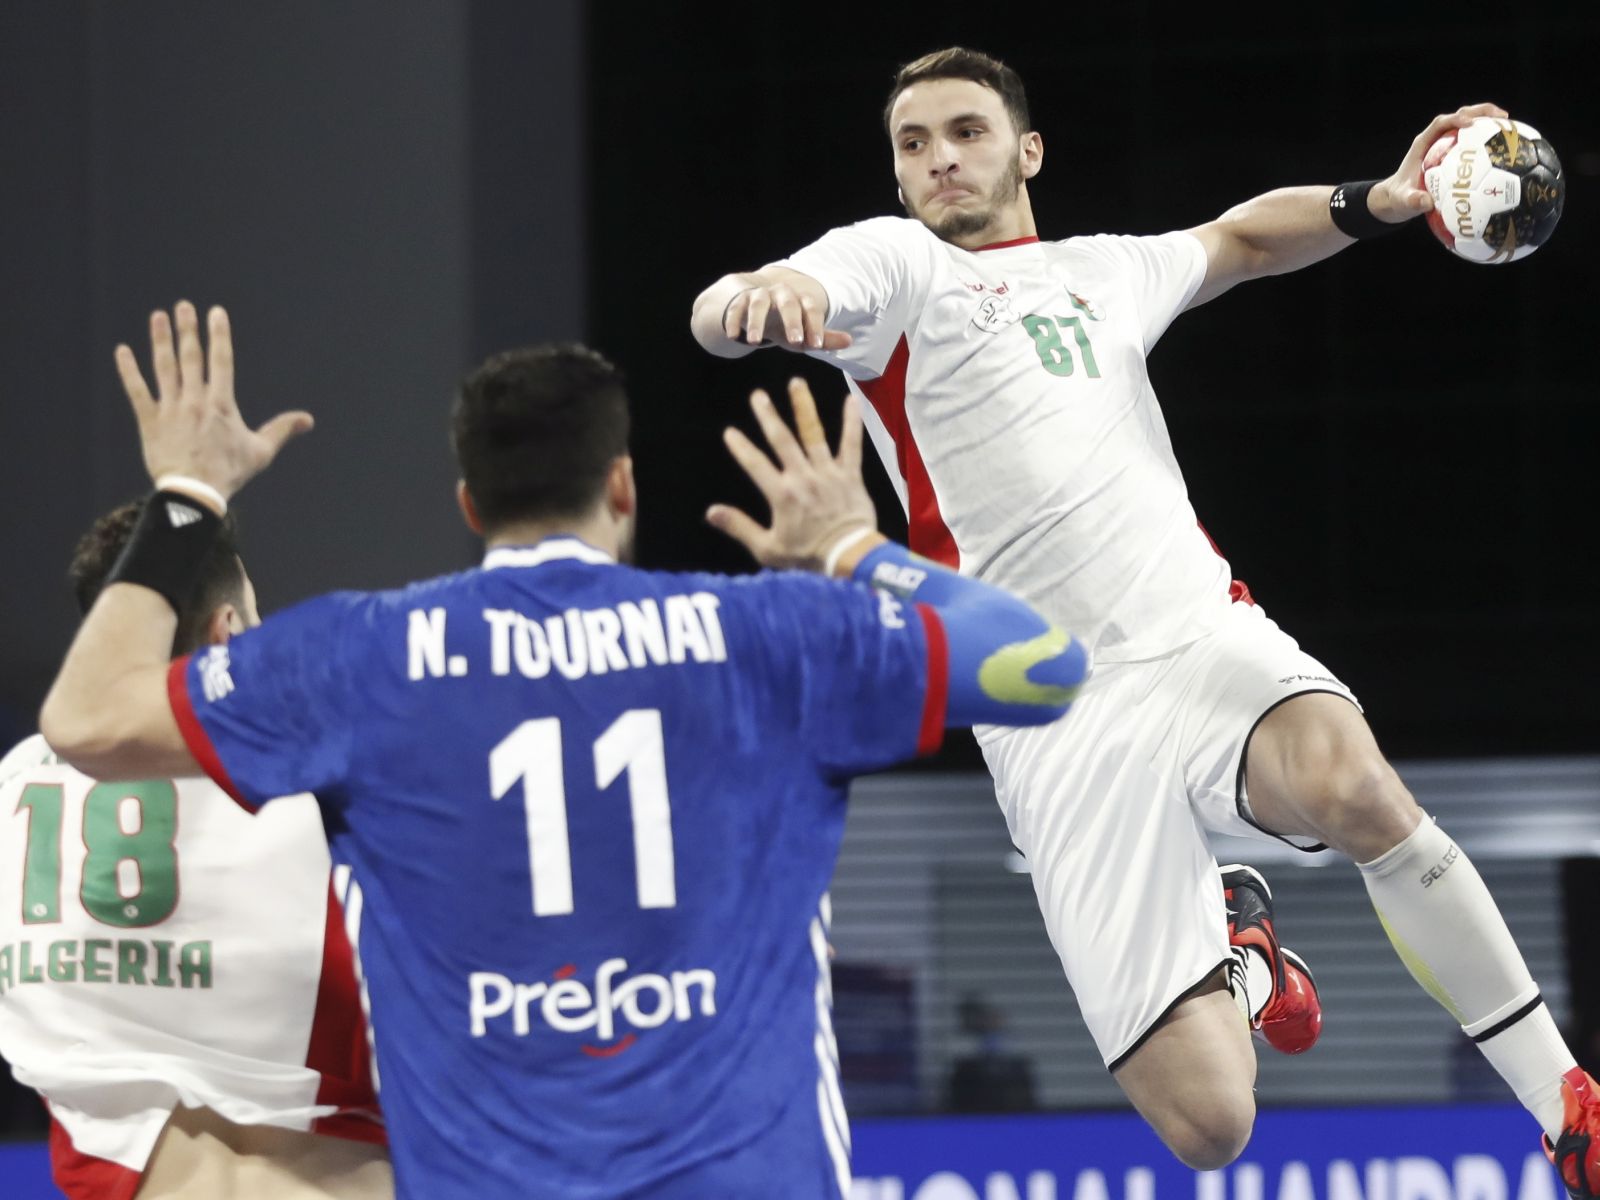 epa08952694 Algeria's Abdi Ayoub (R) in action against France's Nicolas Tournat (C) during the match between France and Algeria at the 27th Men's Handball World Championship in Cairo, Egypt, 20 January 2021.  EPA/Petr Josek / POOL